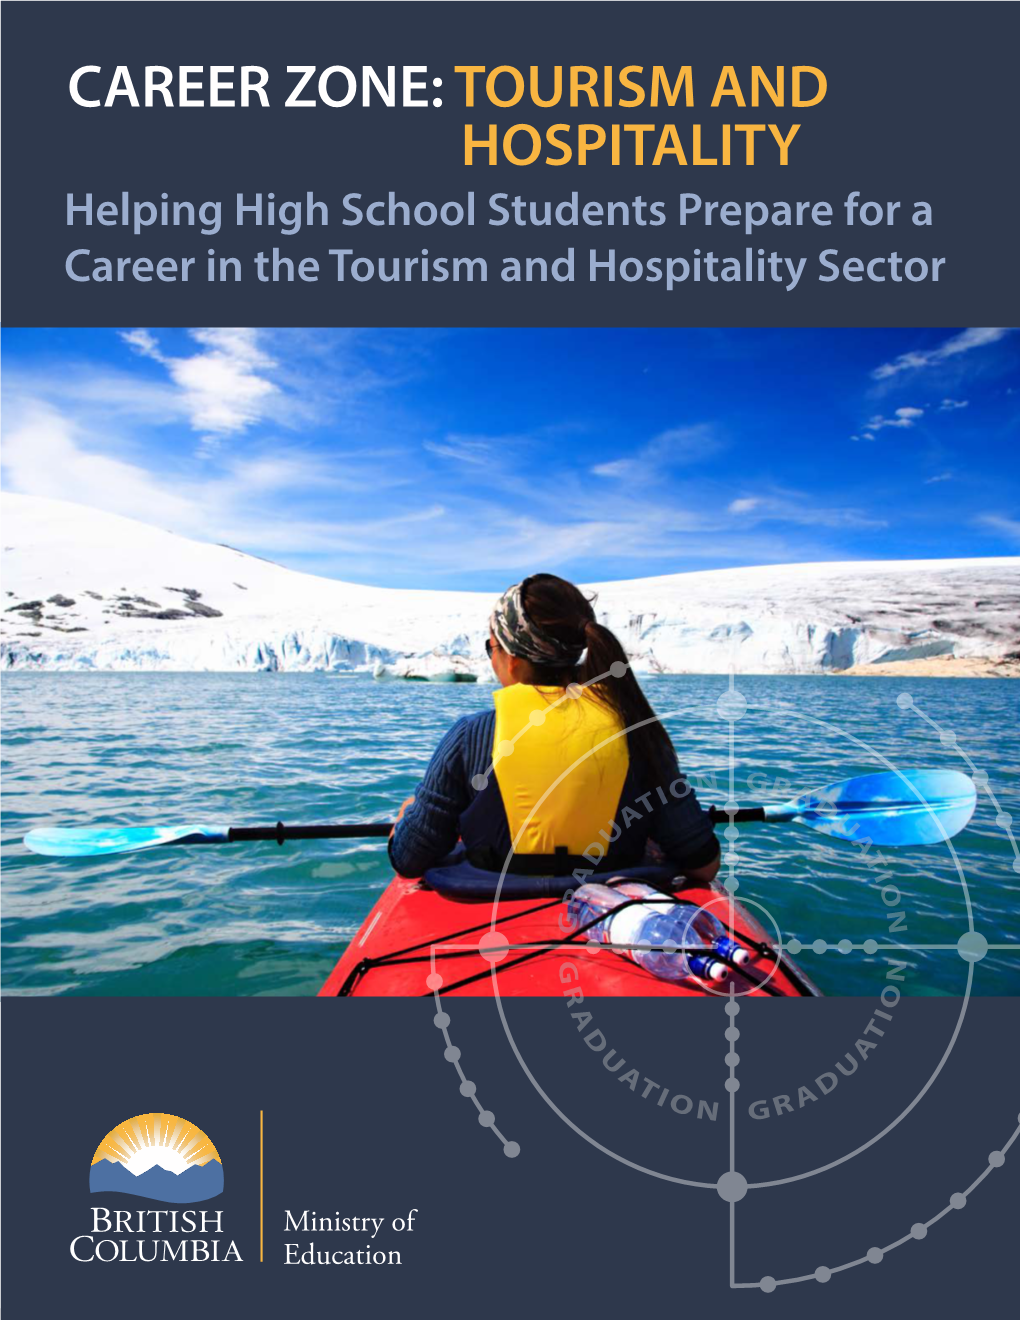 Helping High School Students Prepare for a Career in the Tourism and Hospitality Sector